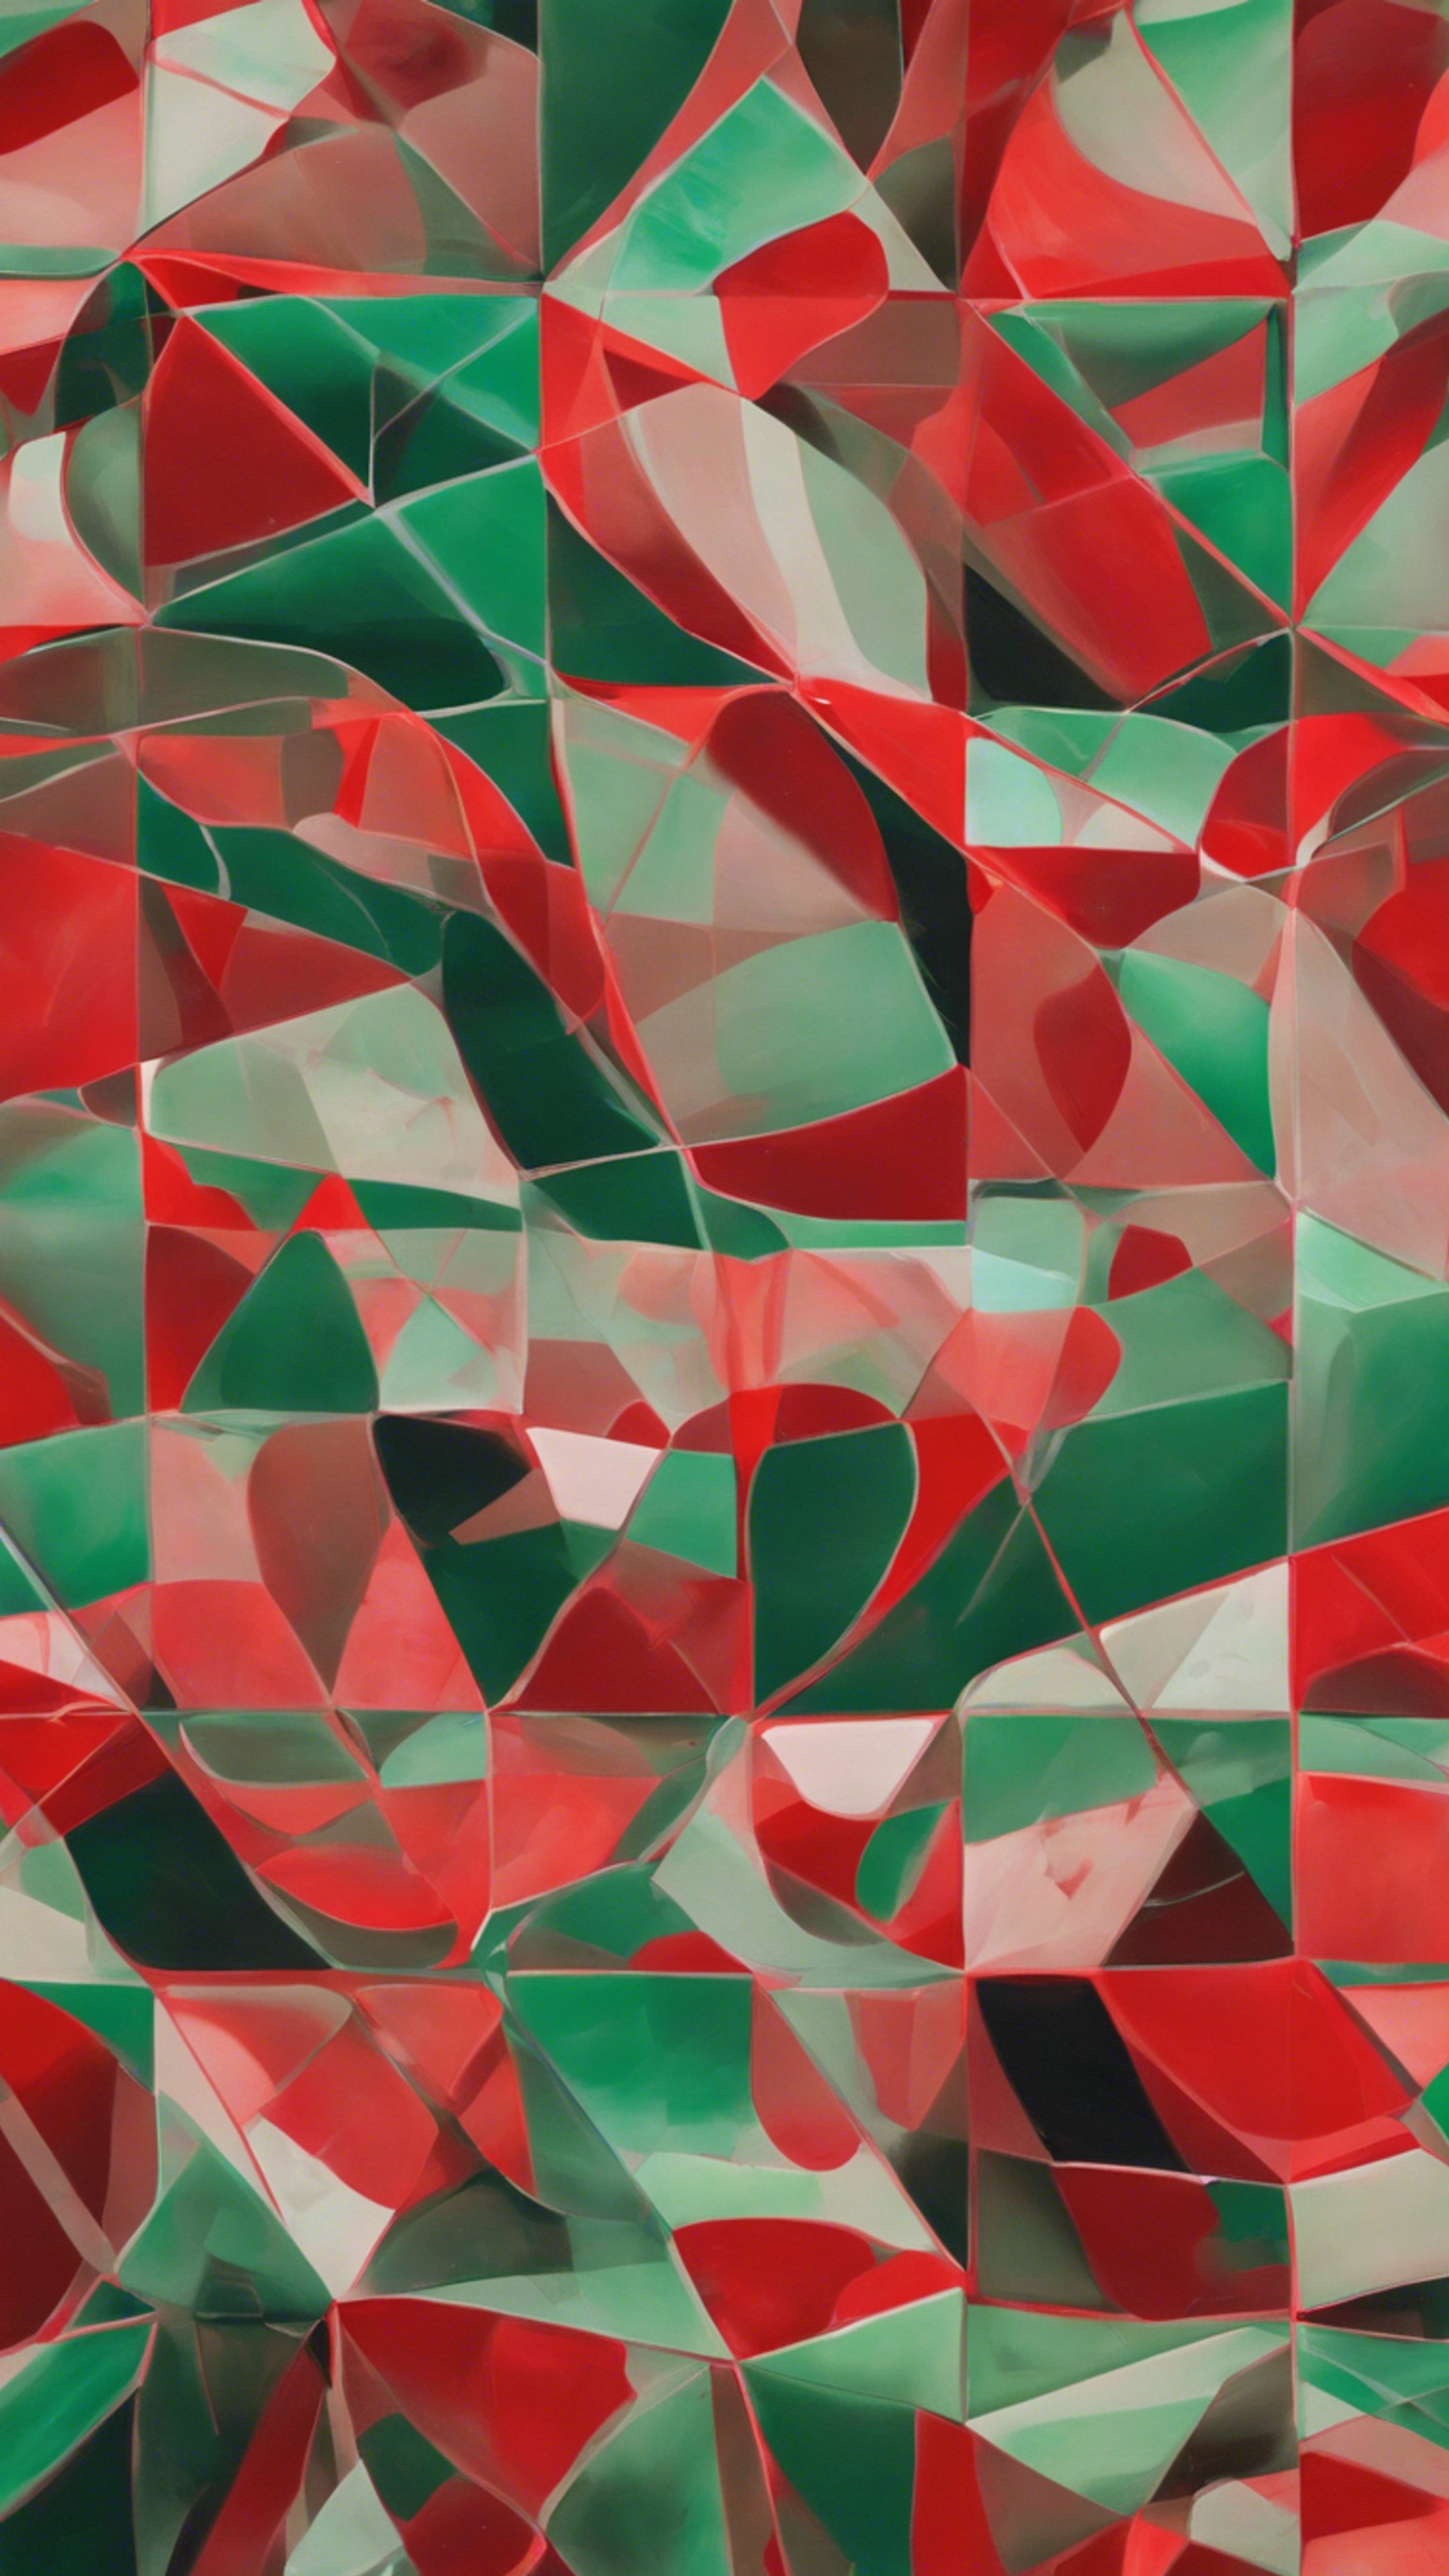 A modernist painting of red and green geometrical shapes, seamless in their connection壁紙[cfa3acf637214e6a9239]